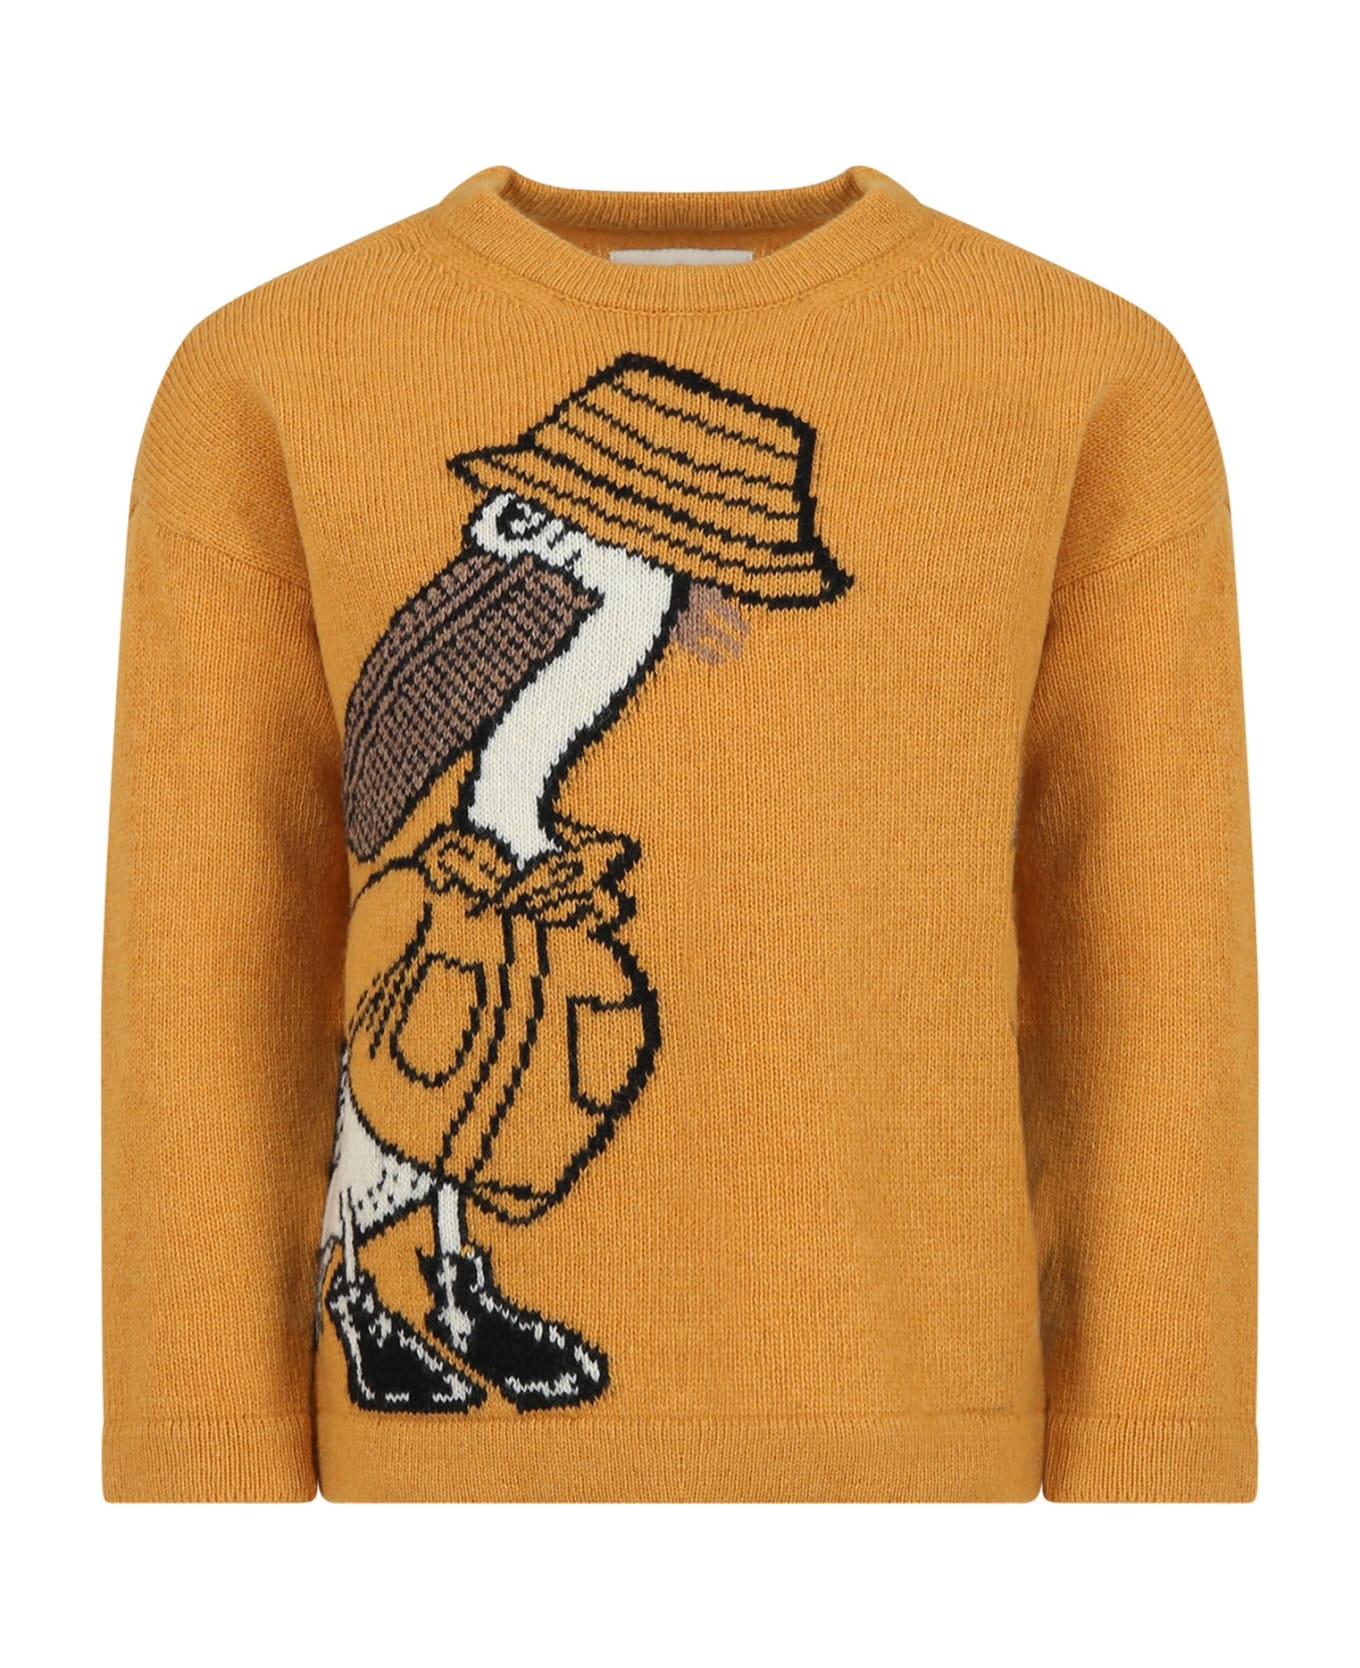 Armani Collezioni Yellow Sweater For Boy With Pelican - Yellow